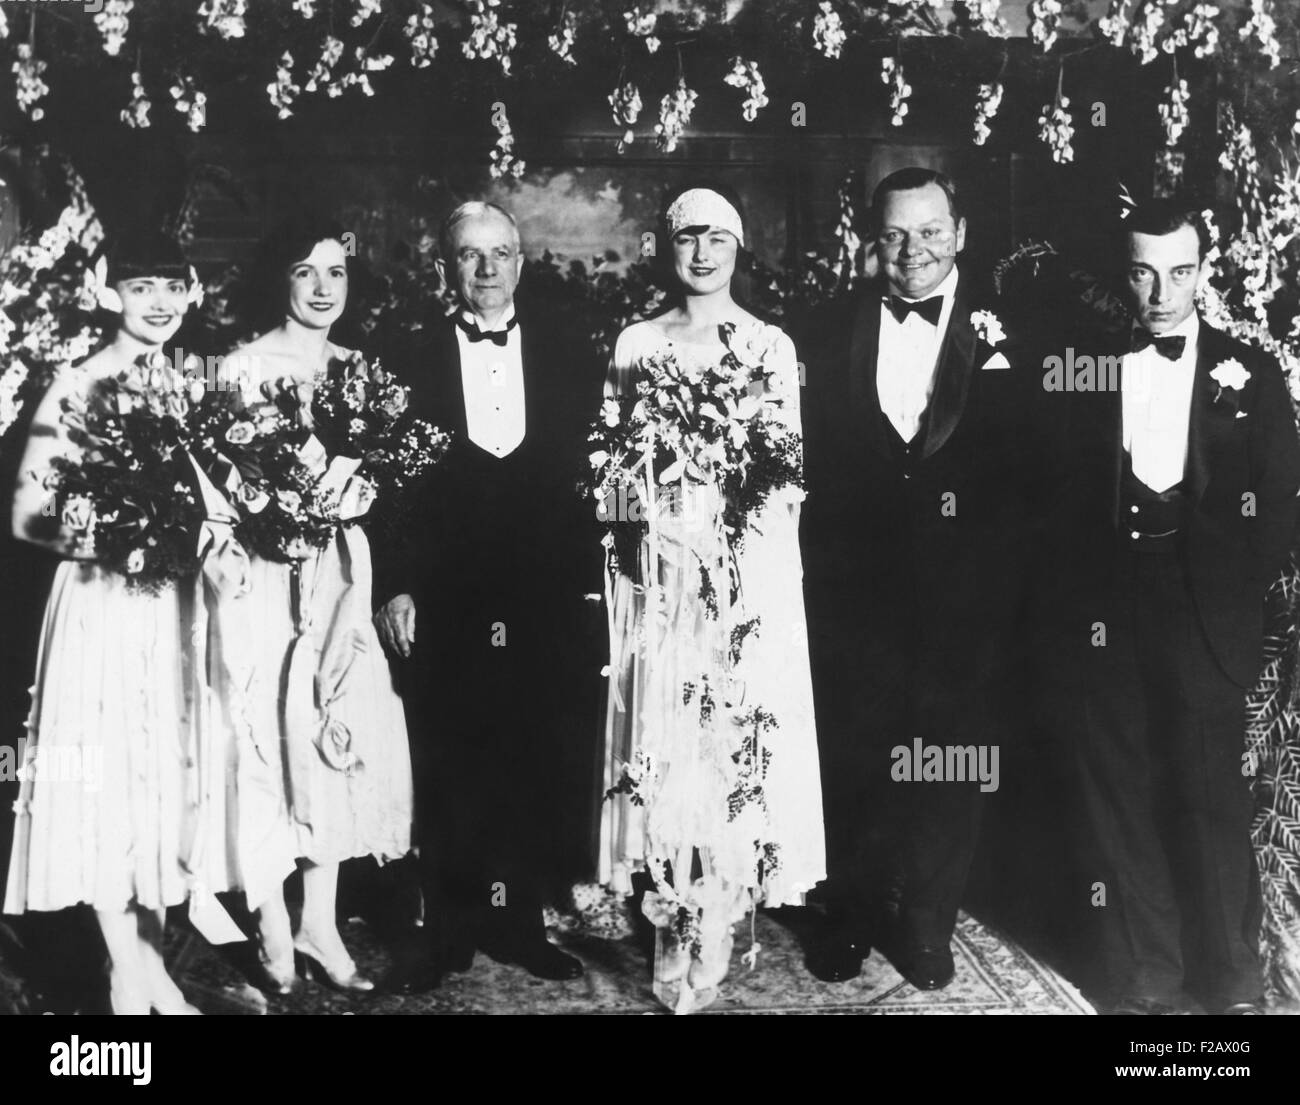 Roscoe 'Fatty' Arbuckle and Doris Deane wedding on May 16, 1925. They were married at the home of the bride's mother in South Pasadena, California. L-R: Chrystine Francis, maid of honor; Natalie Talmadge Keaton, matron of honor; Judge Crawford; the bride; Arbuckle; and Buster Keaton best man. (CSU 2015 11 1190) Stock Photo